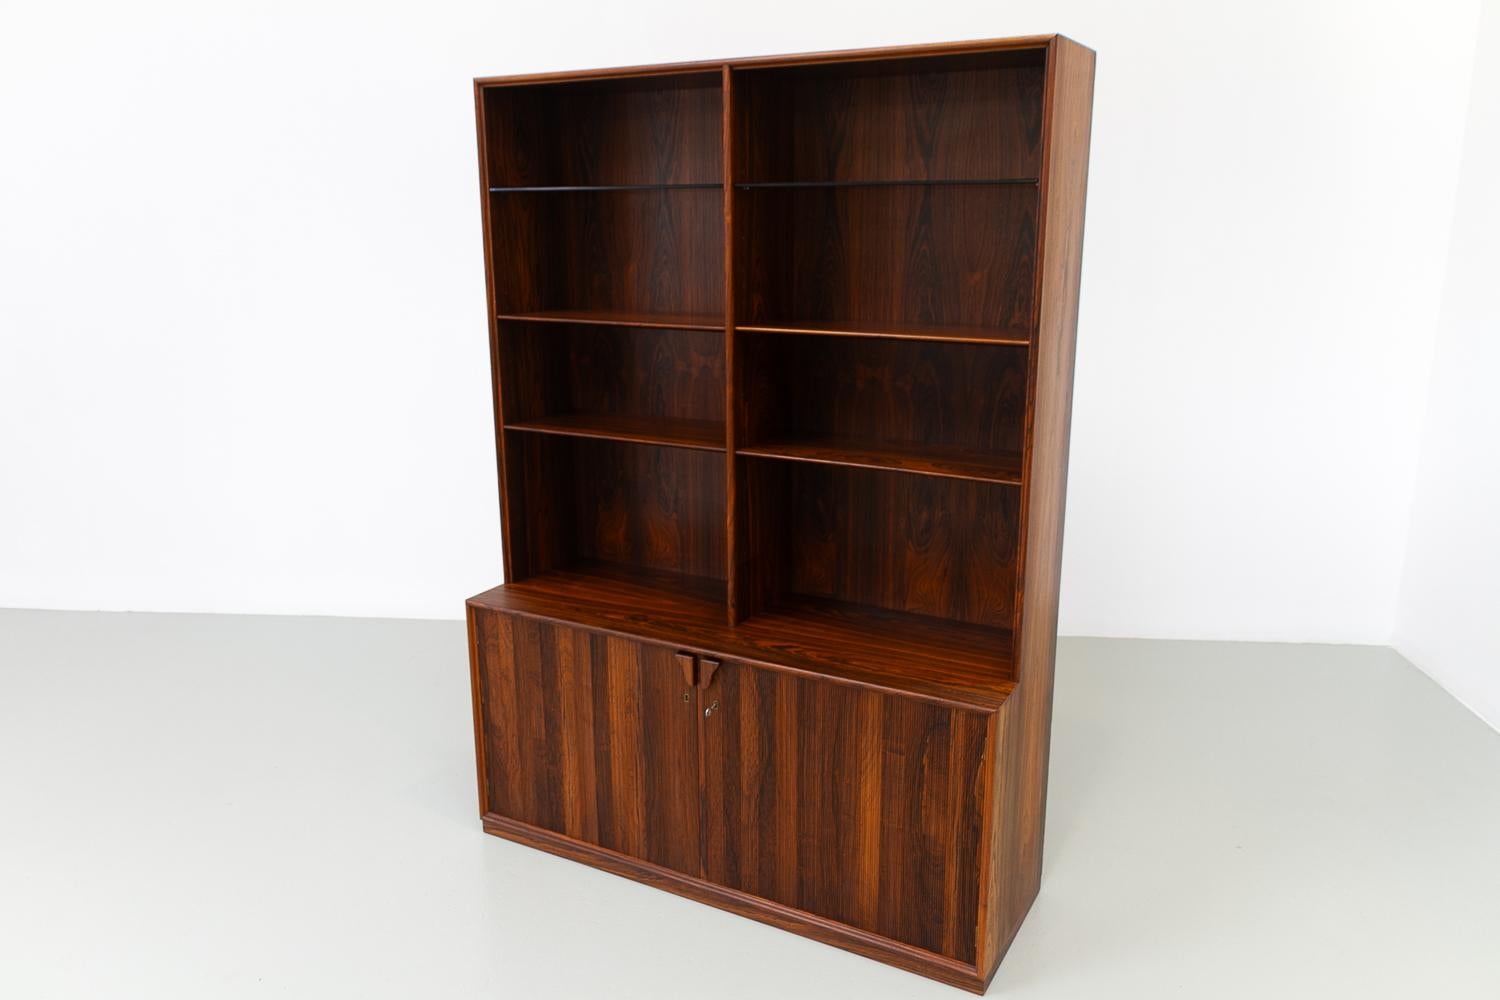 Scandinavian Modern Danish Modern Rosewood Bookcase by Frode Holm for Illums, 1950s. For Sale